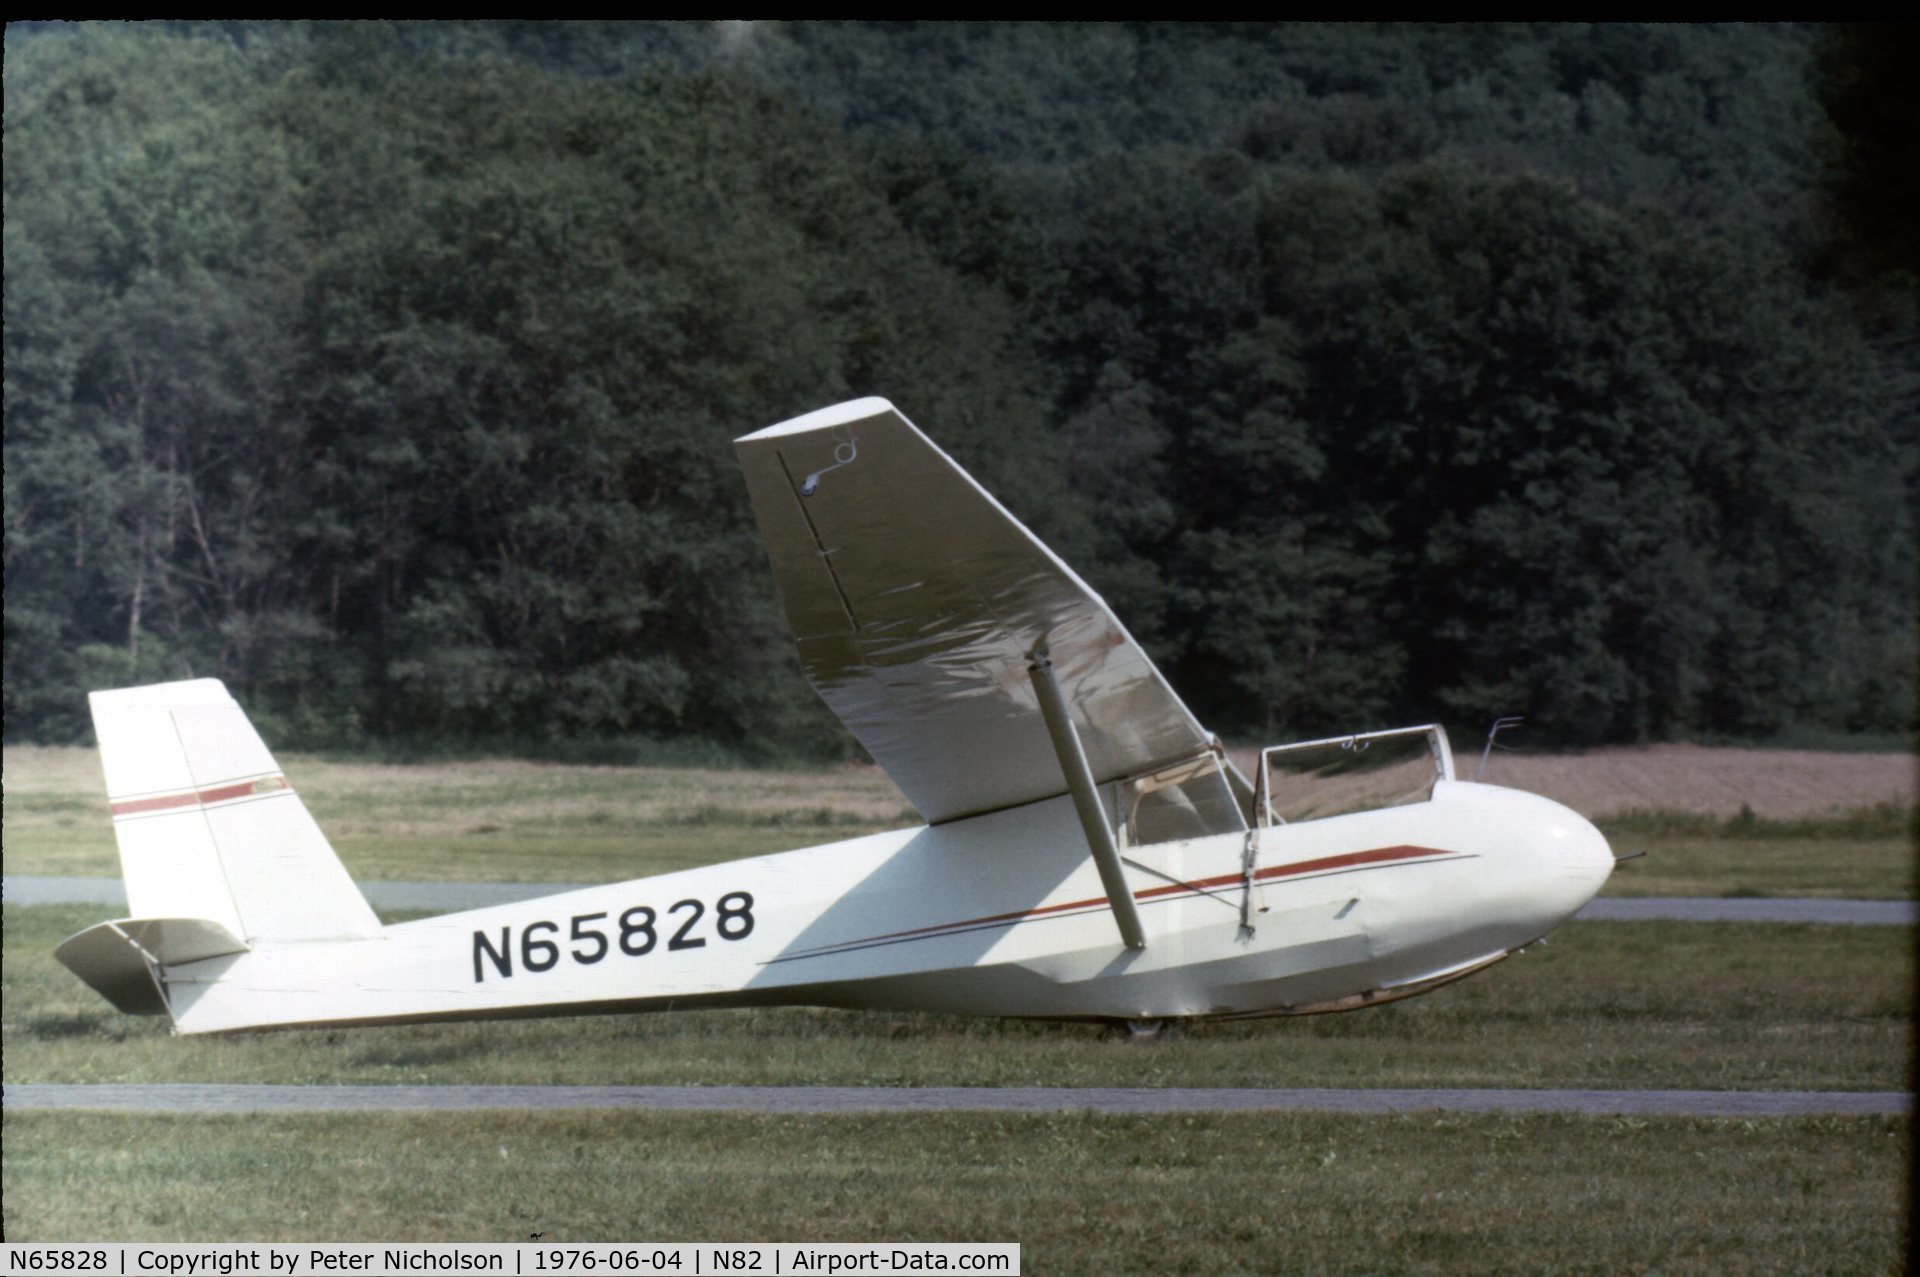 N65828, 1974 Schweizer SGS 2-33A C/N 325, Flown with Cessna Ector 305A N1835 at Wurtsboro in the summer of 1976.